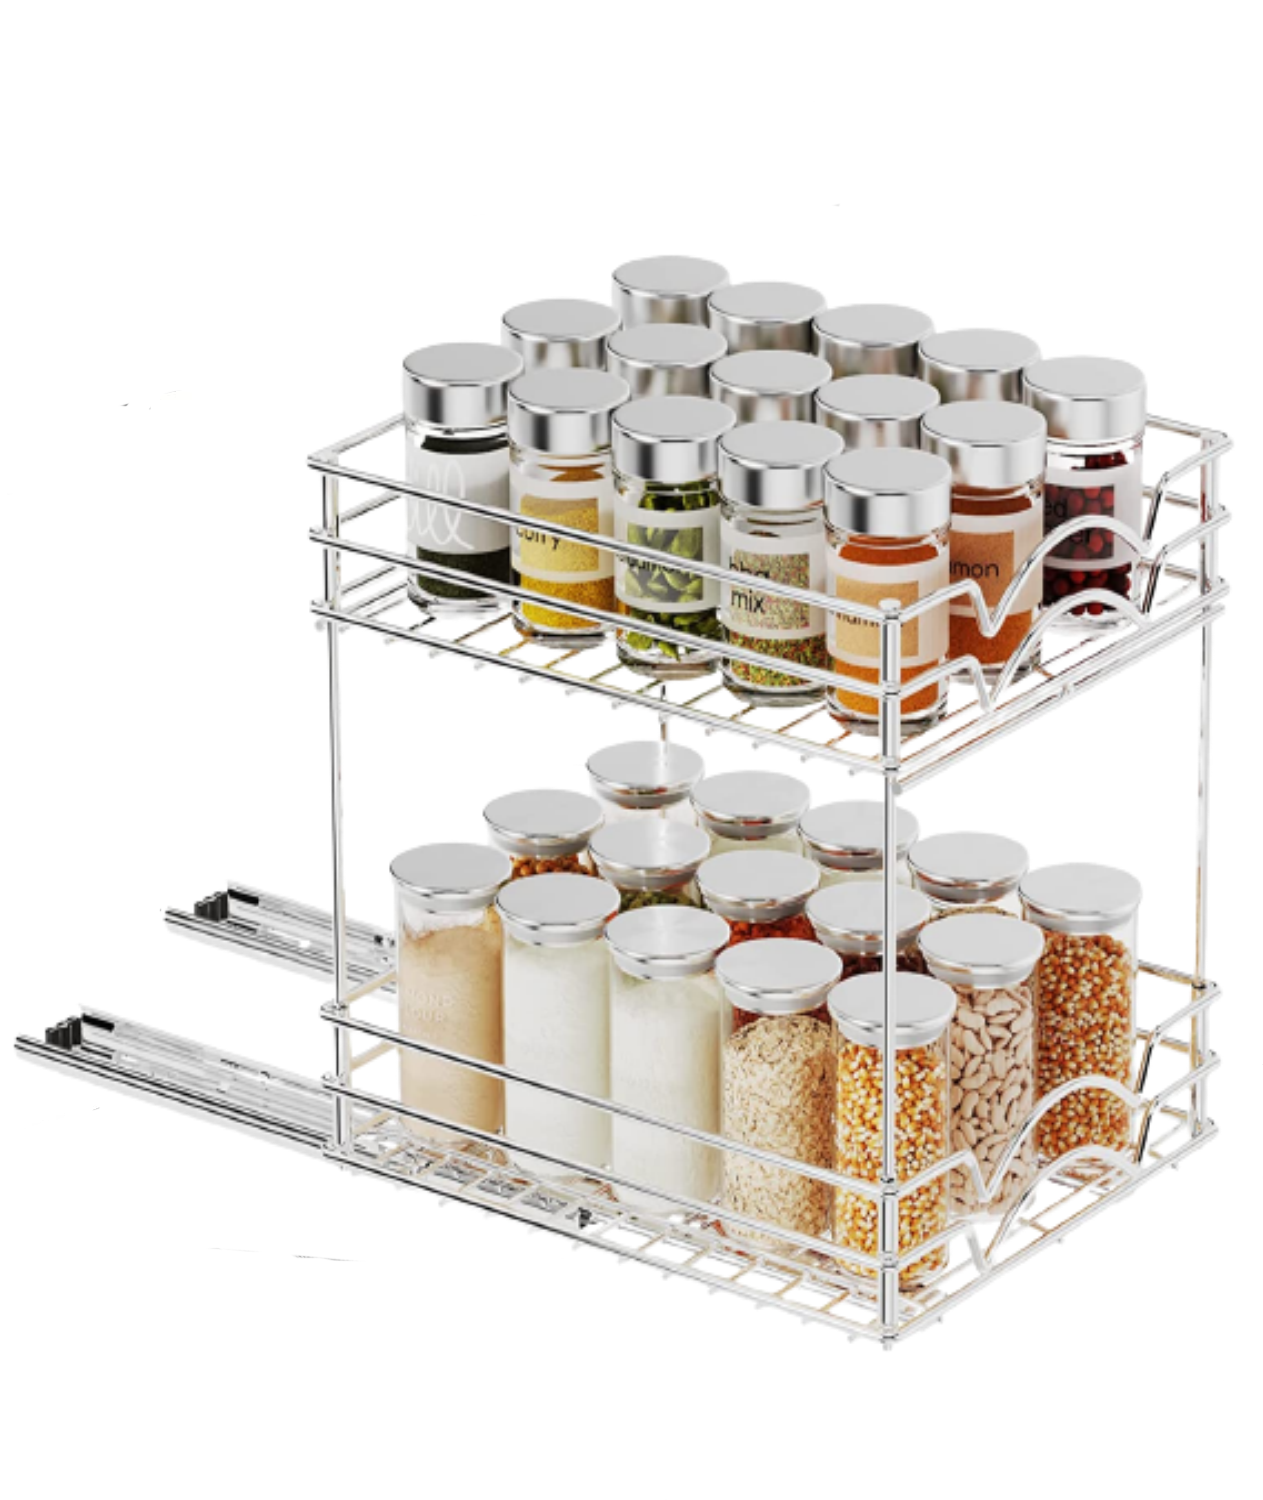 FANHAO Pull Out Spice Rack Organizer for Cabinet, Heavy Duty Slide Out Seasoning Kitchen Organizer